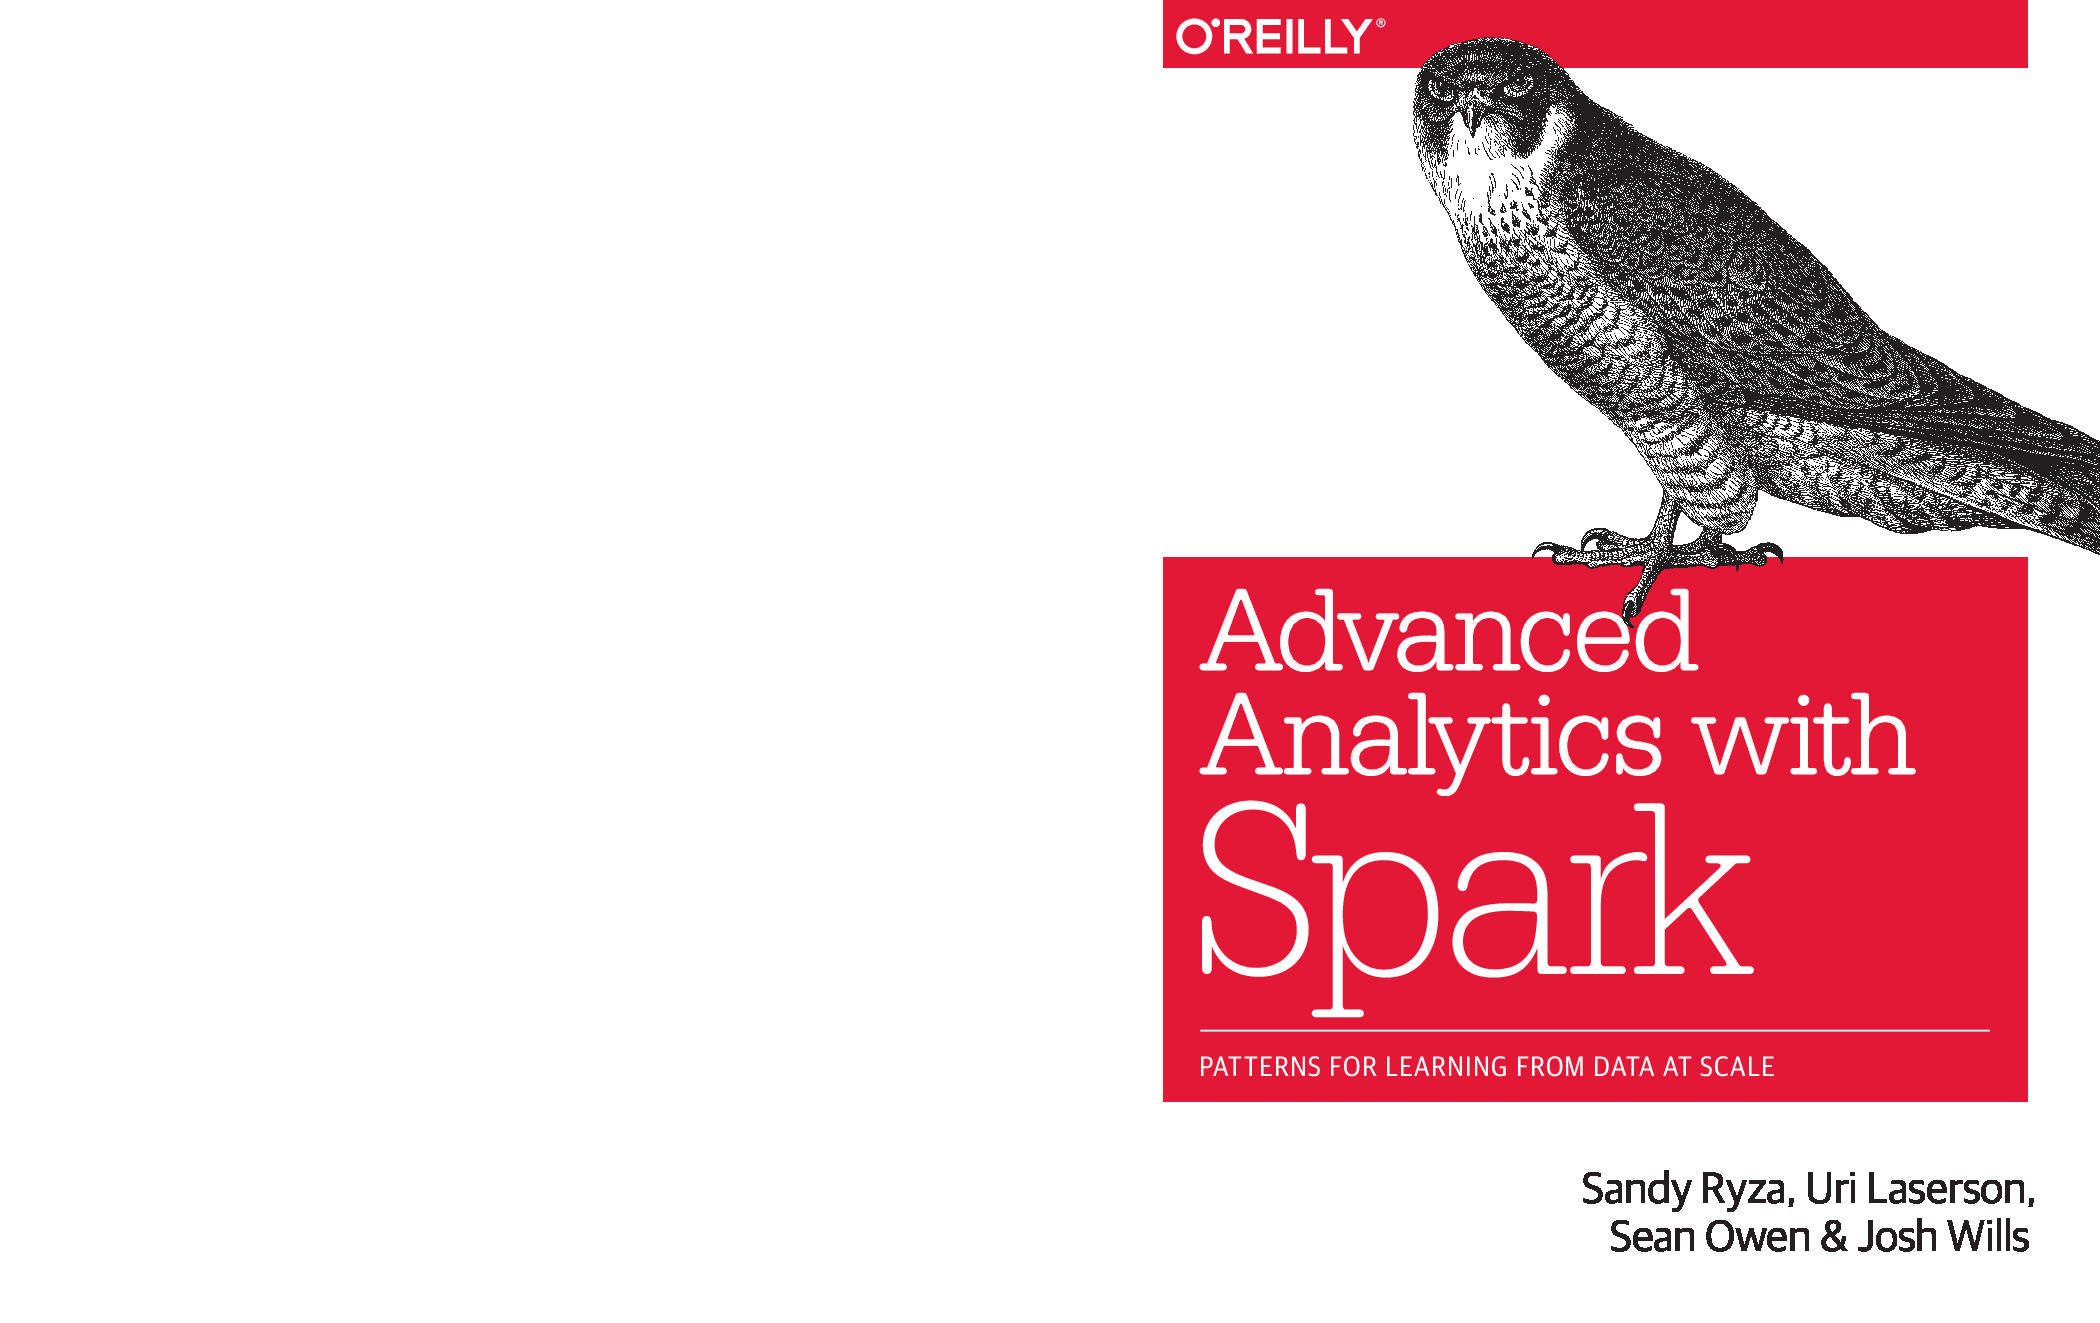 Advanced Analytics with Spark – Patterns for Learning from Data at Scale